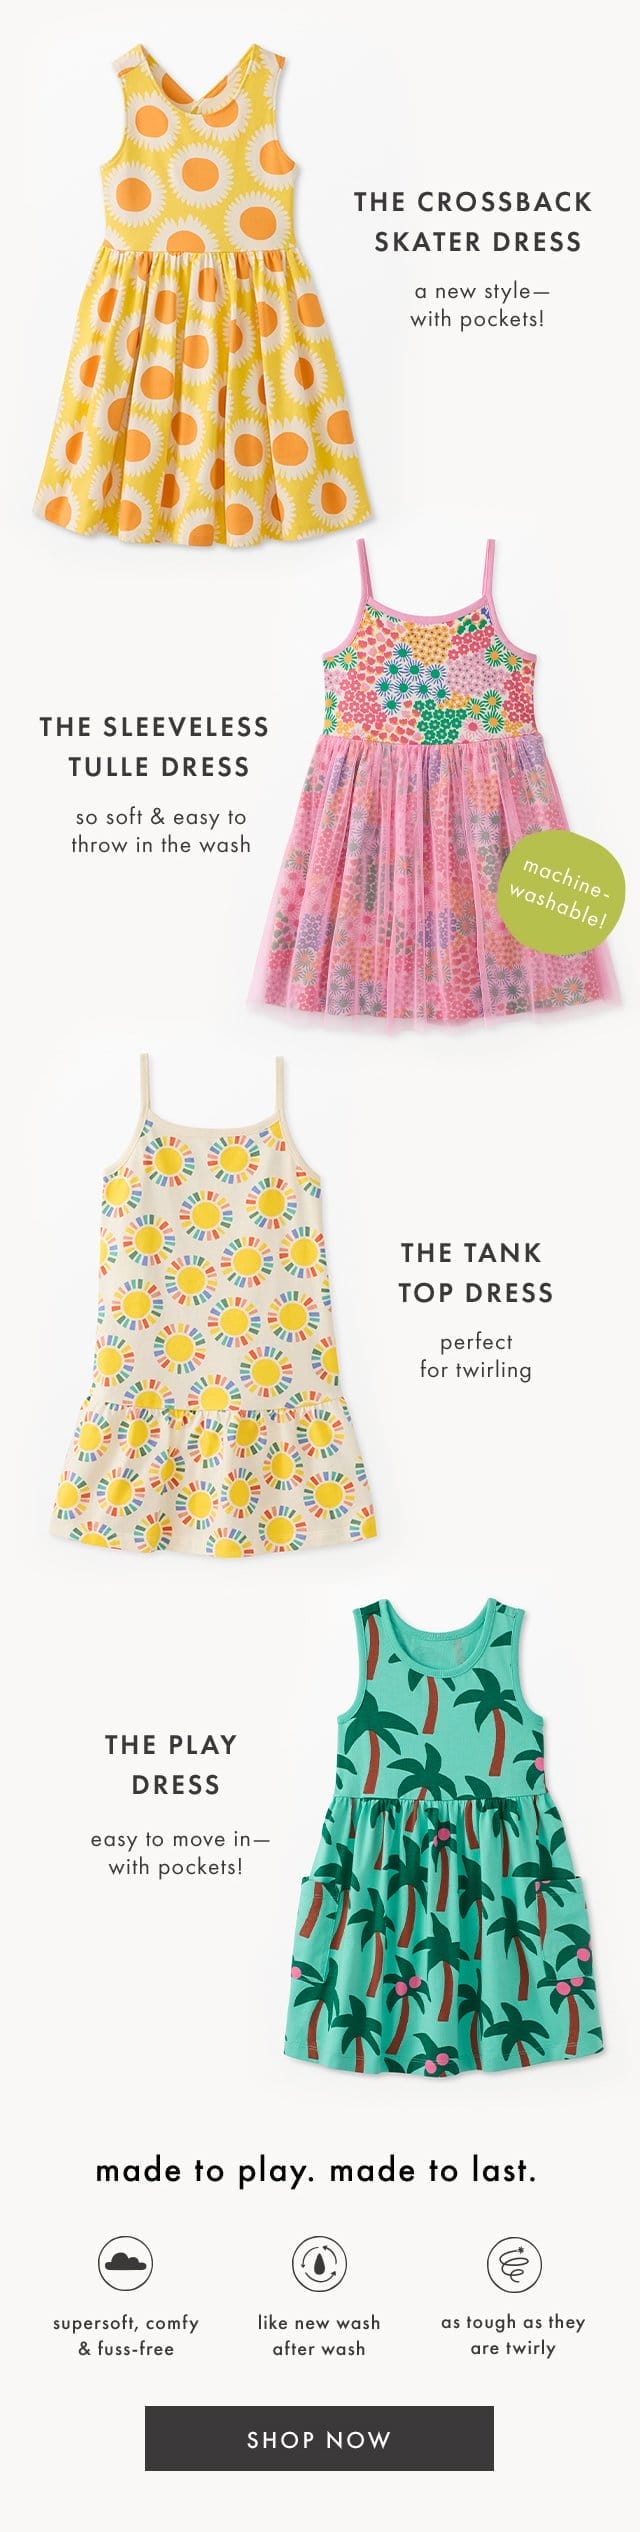 THE CROSSBACK SKATER DRESS | a new style with pockets! | THE SLEEVELESS TULLE DRESS | so soft & easy to throw in the wash | machine washable! | THE TANK TOP DRESS | perfect for twirling | THE PLAY DRESS | easy to move in with pockets! | made to play. made to last. | supersoft, comfy & fuss-free | like new wash after wash | as tough as they are twirly | SHOP NOW